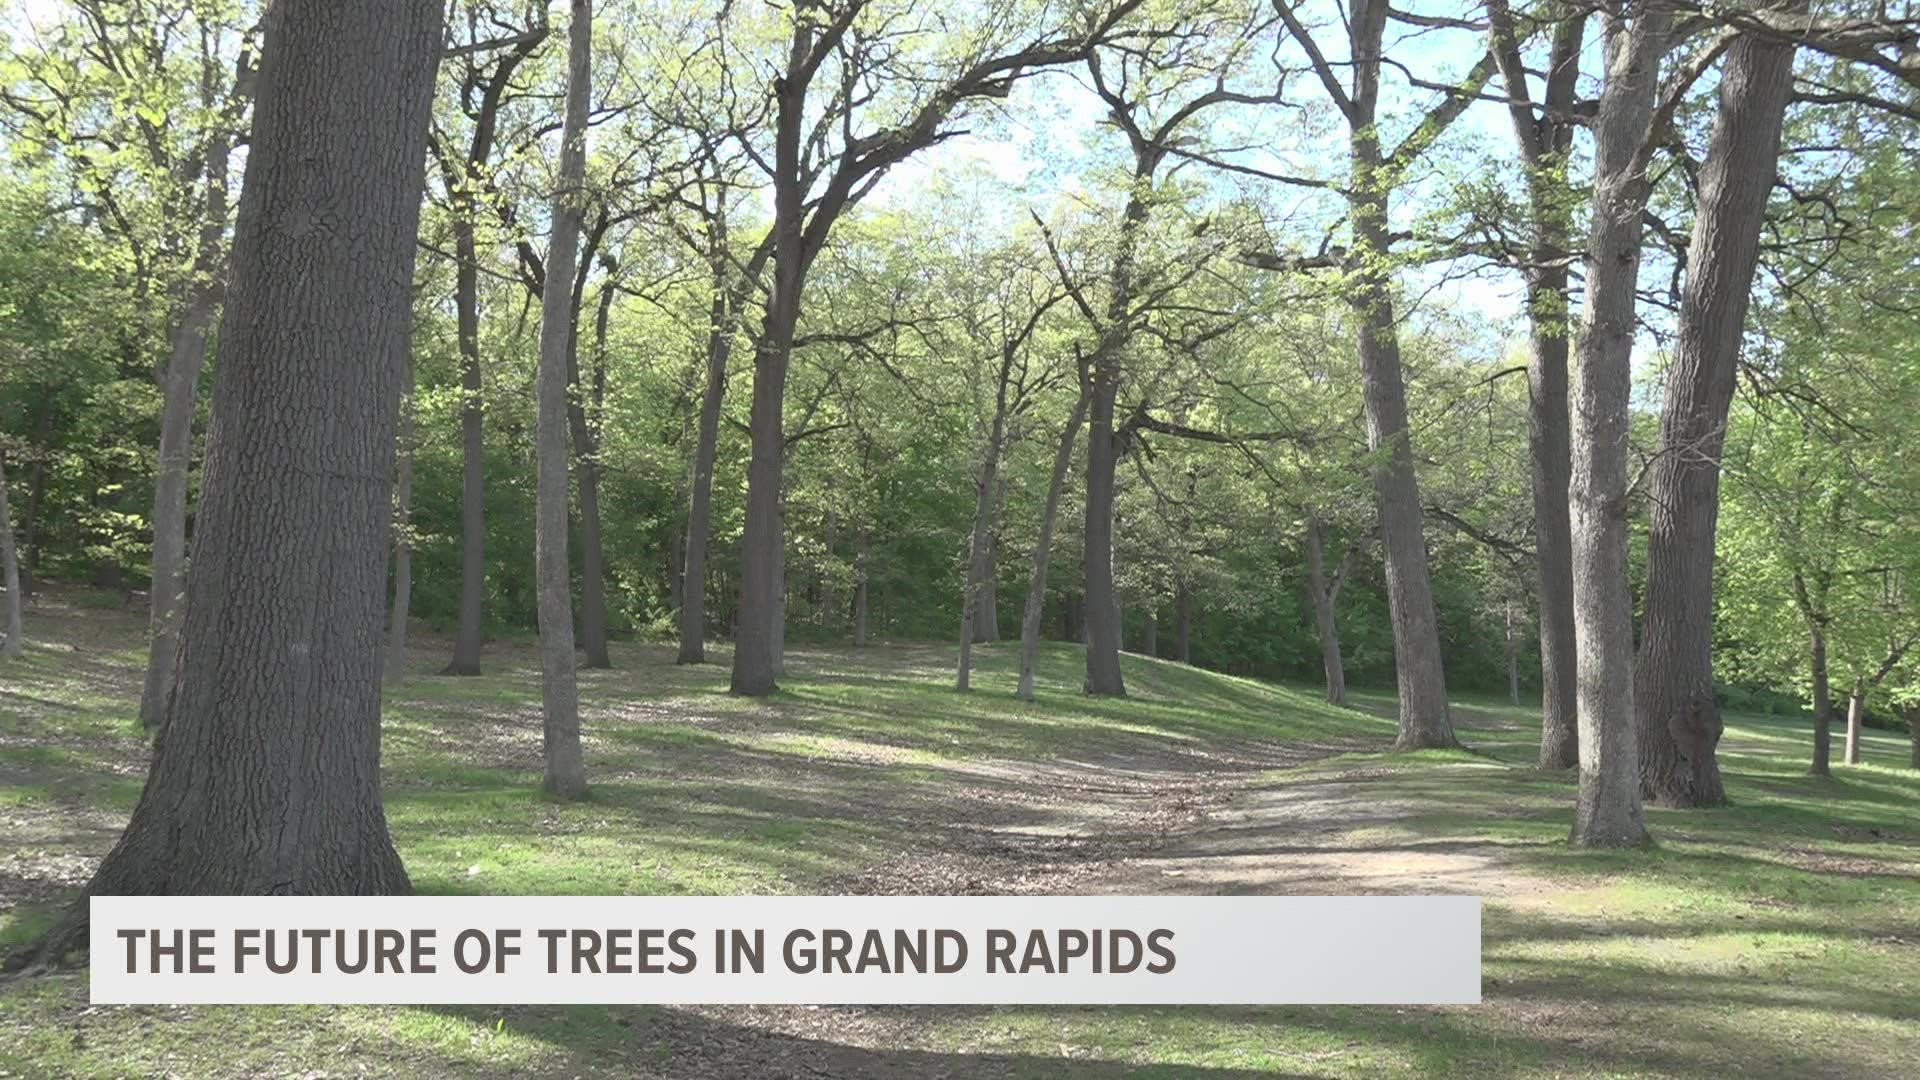 The organization's new executive director says he wants to make Grand Rapids the "healthiest, happiest, and most park and shade equitable city in America."